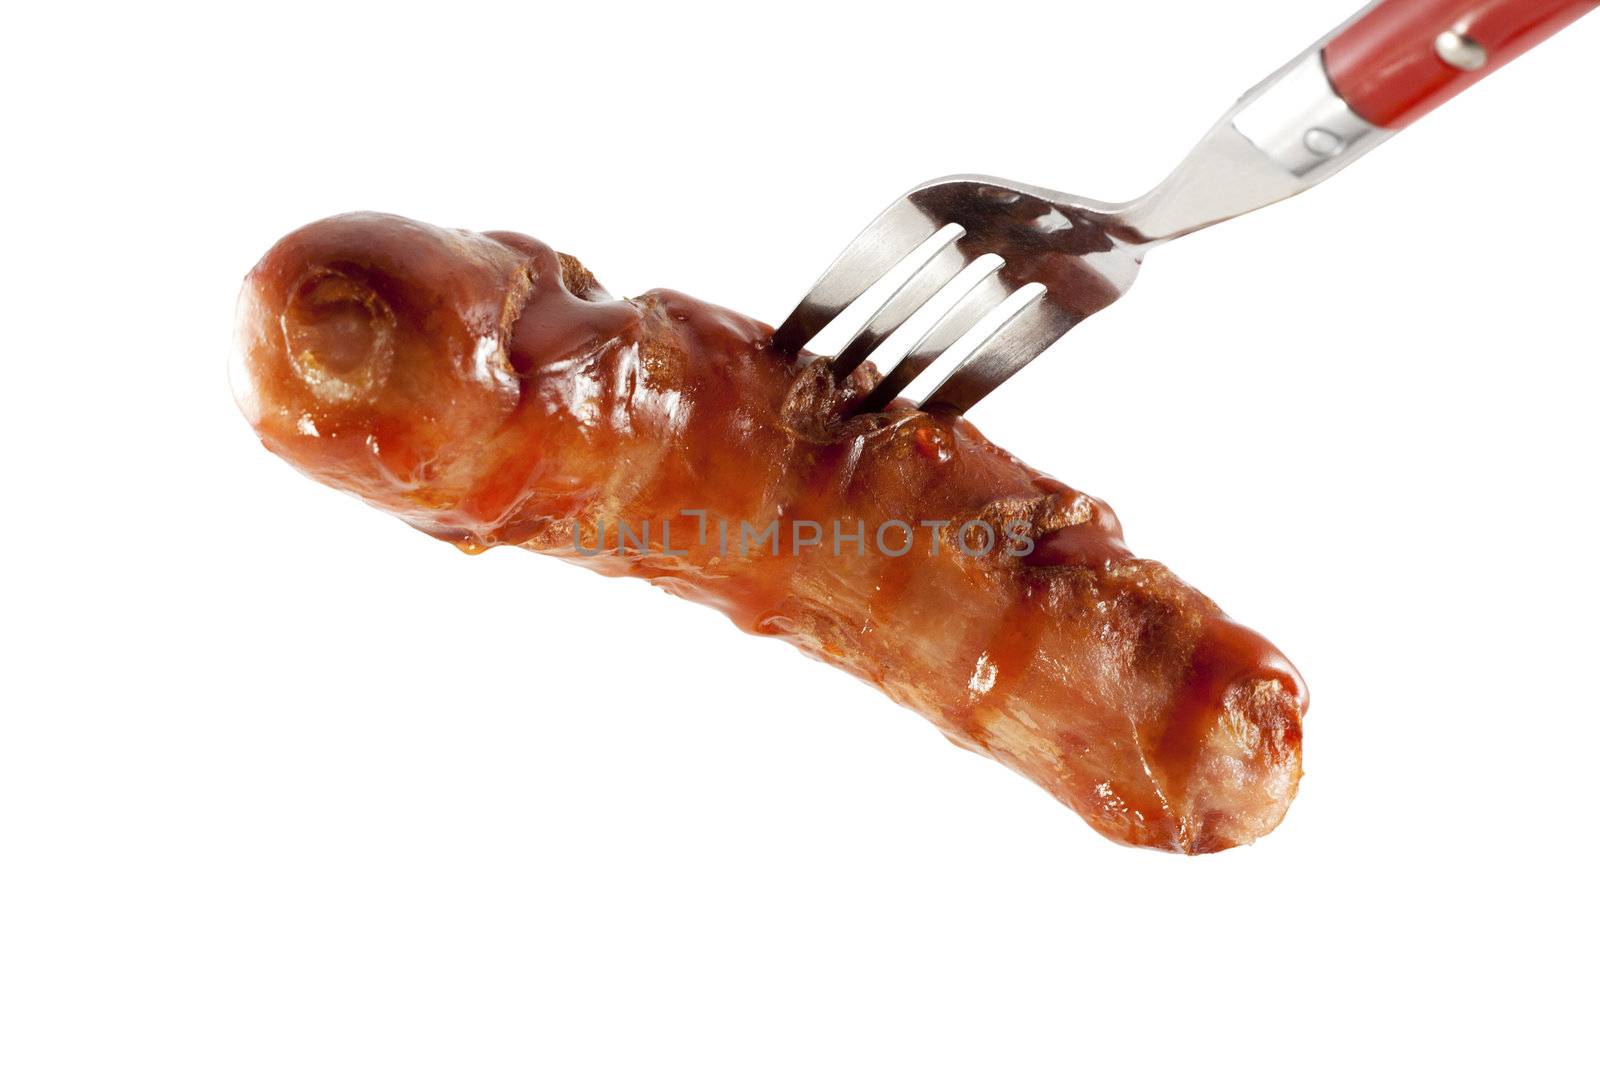 Fried sausage on a fork by magraphics